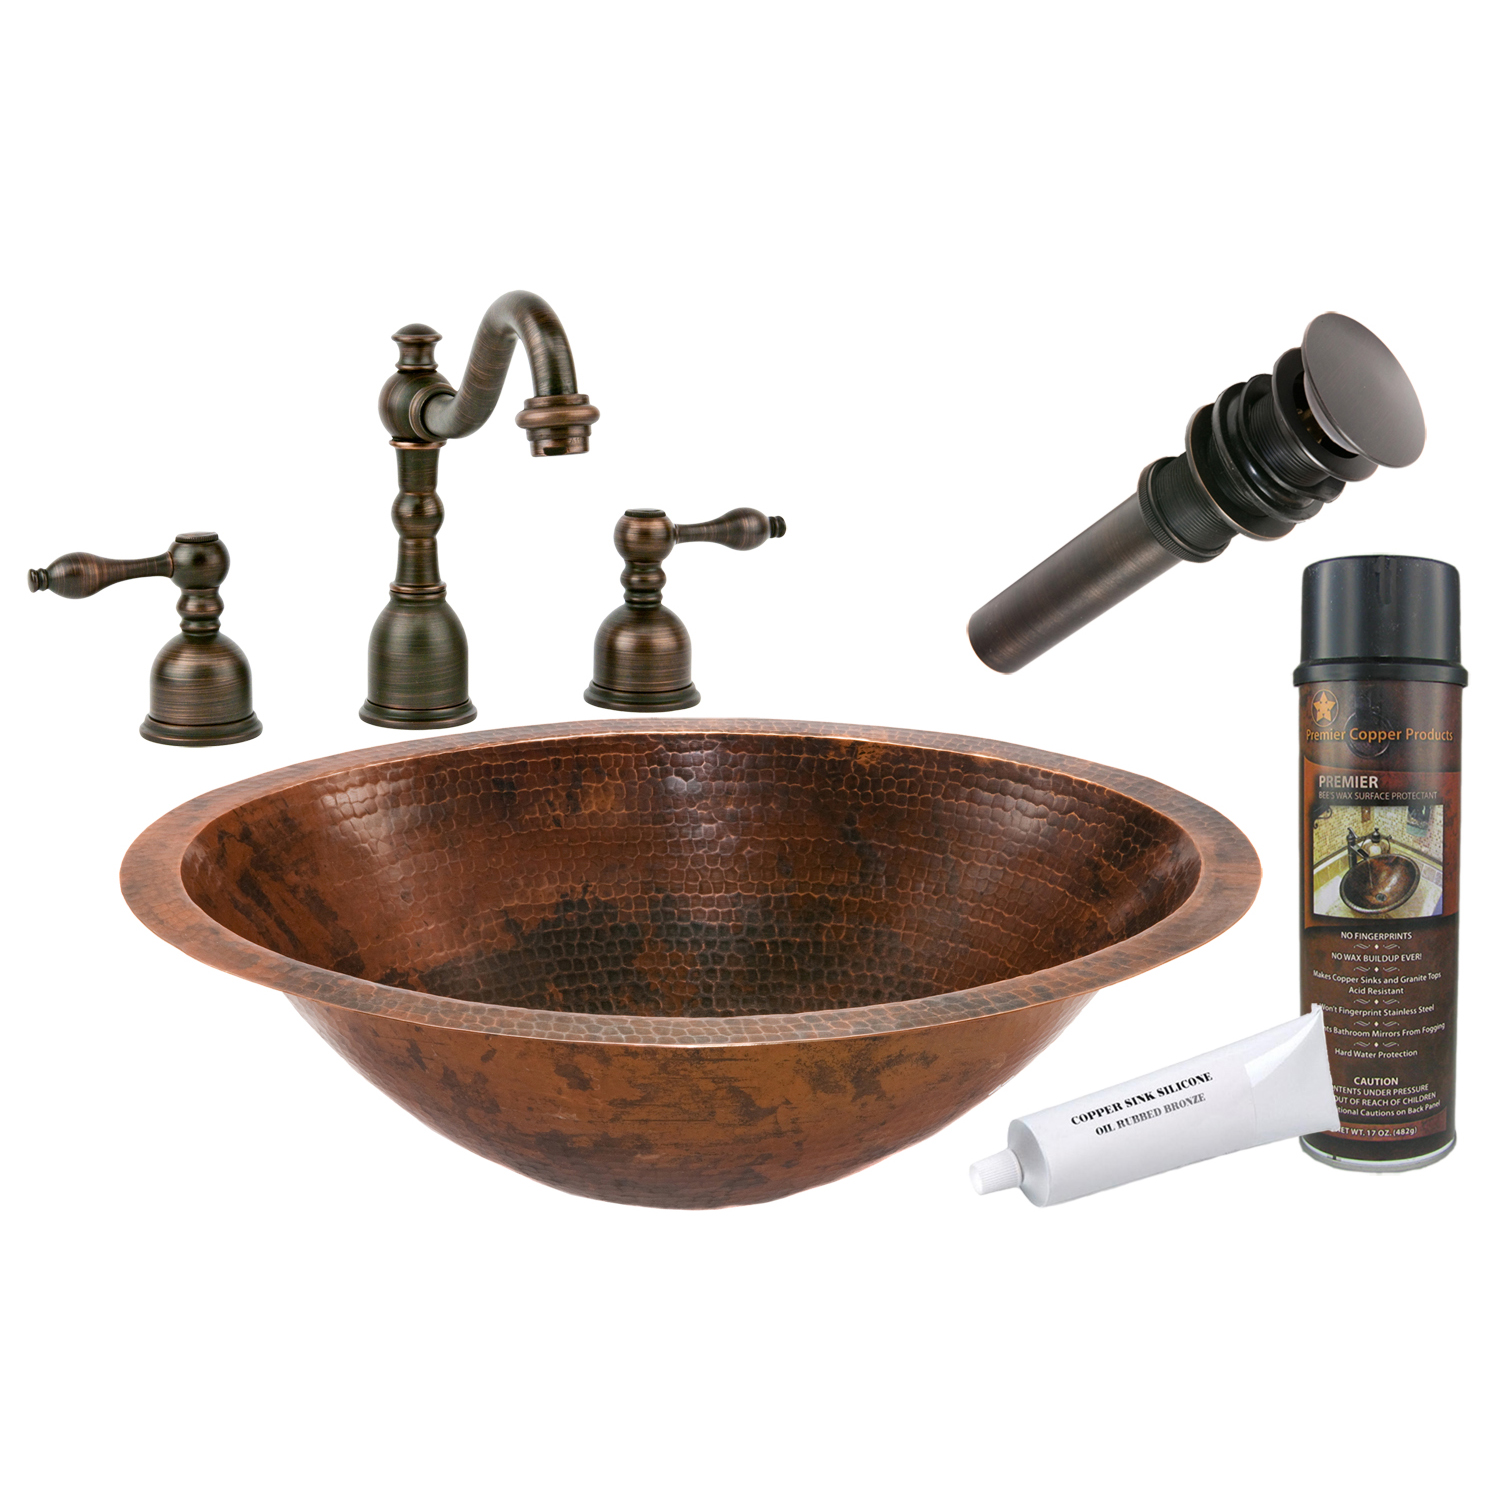 Master Bath Oval Under Counter Hammered Copper Bathroom Sink, Faucet And Accessories Package, Oil Rubbed Bronze